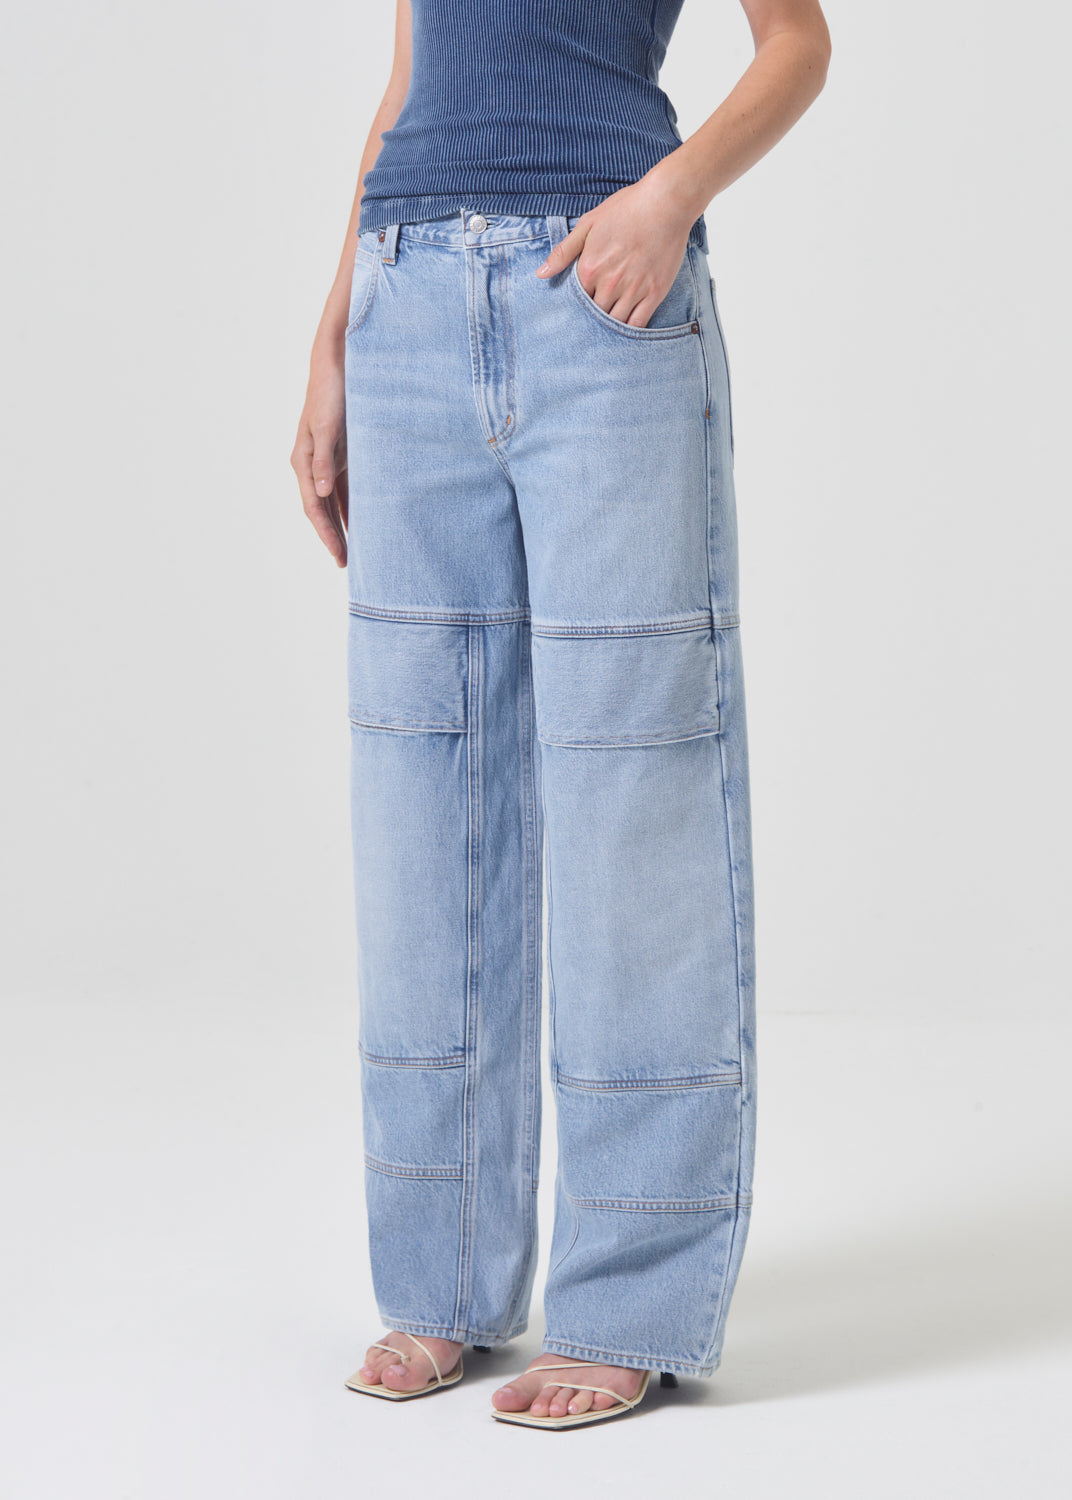 Tanis Utility Jean in Conflict